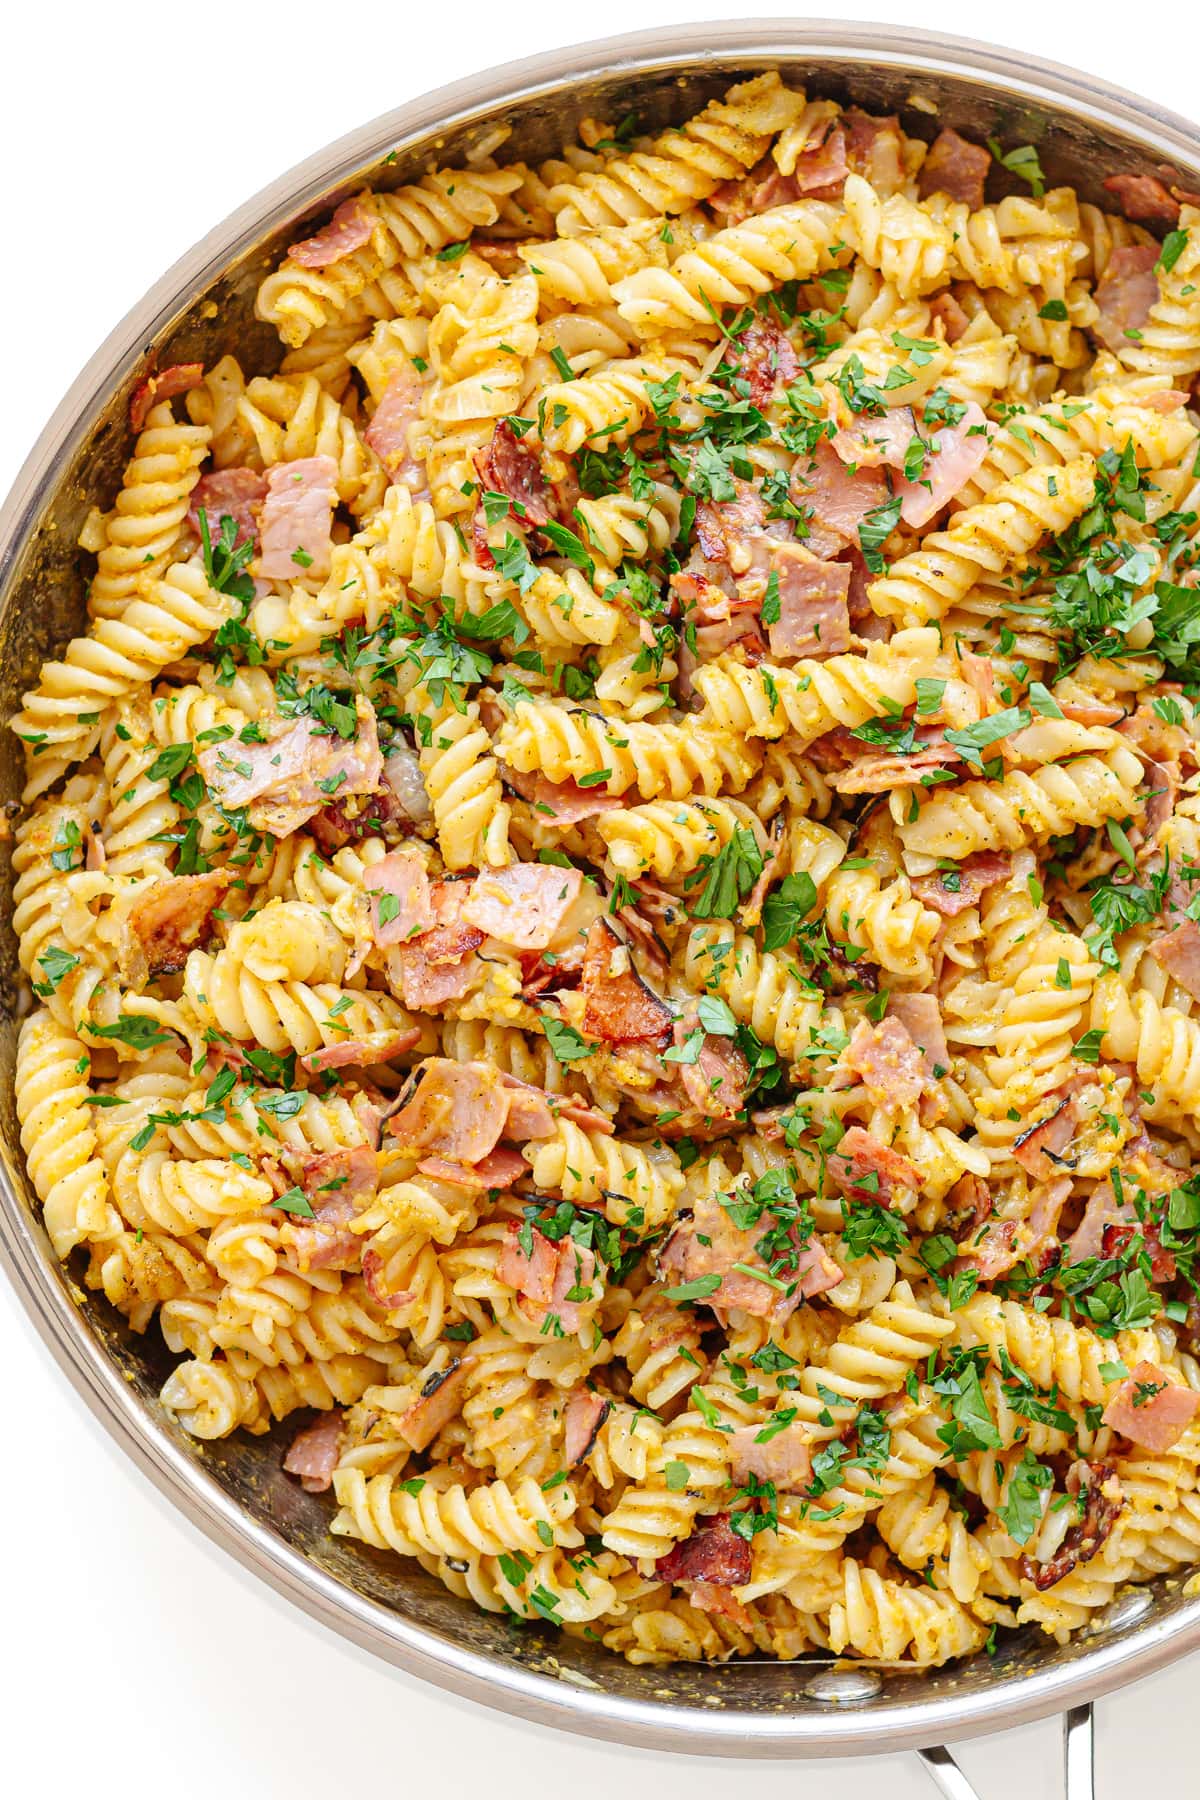 German ham and egg pasta in a stainless steel skillet.